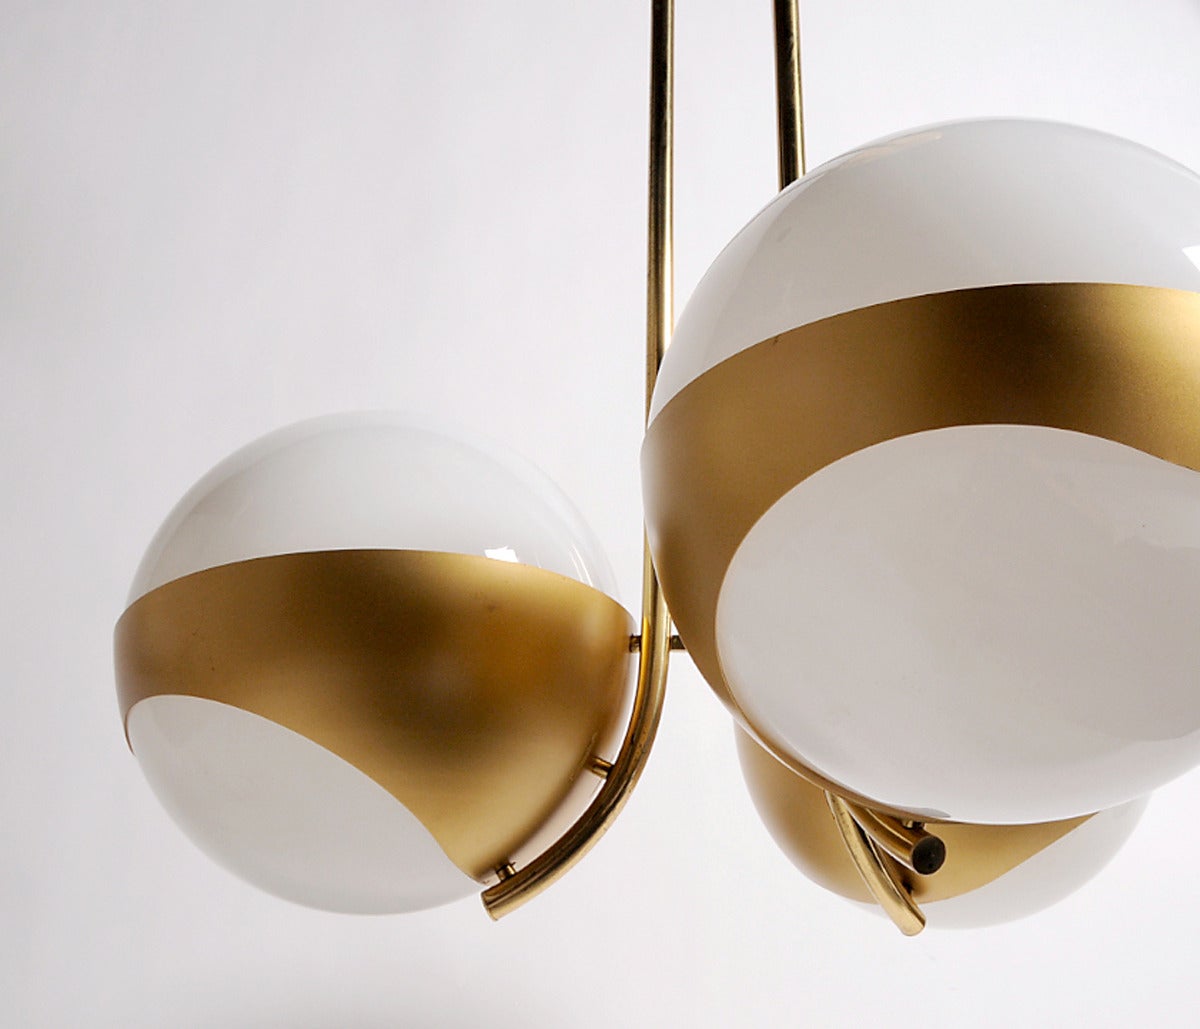 Suspension light with three glass opaline globes resting on a metal frame.